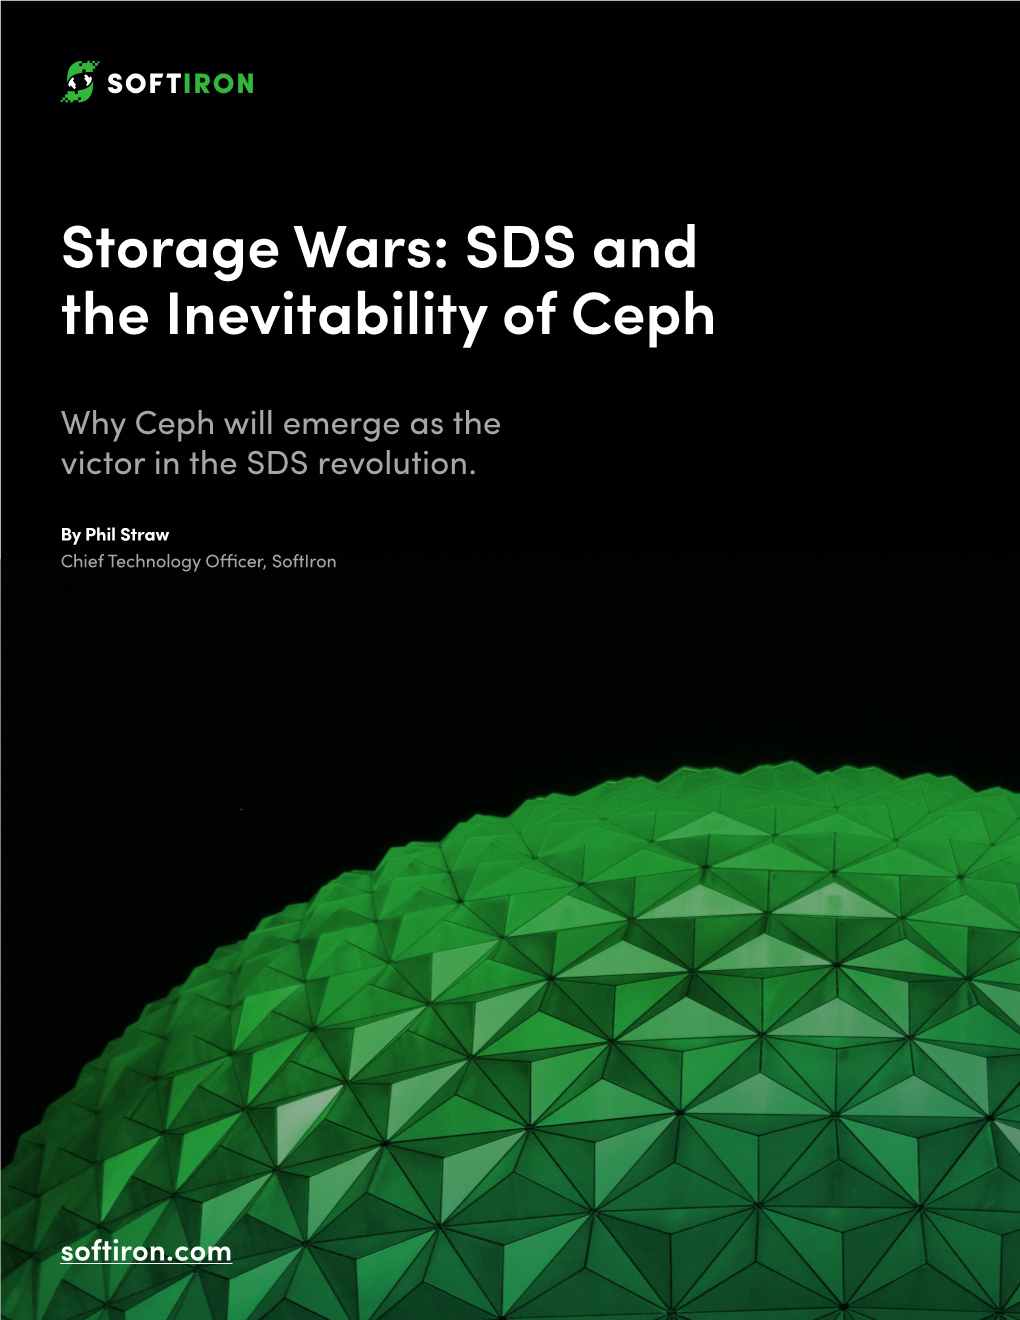 Storage Wars: SDS and the Inevitability of Ceph